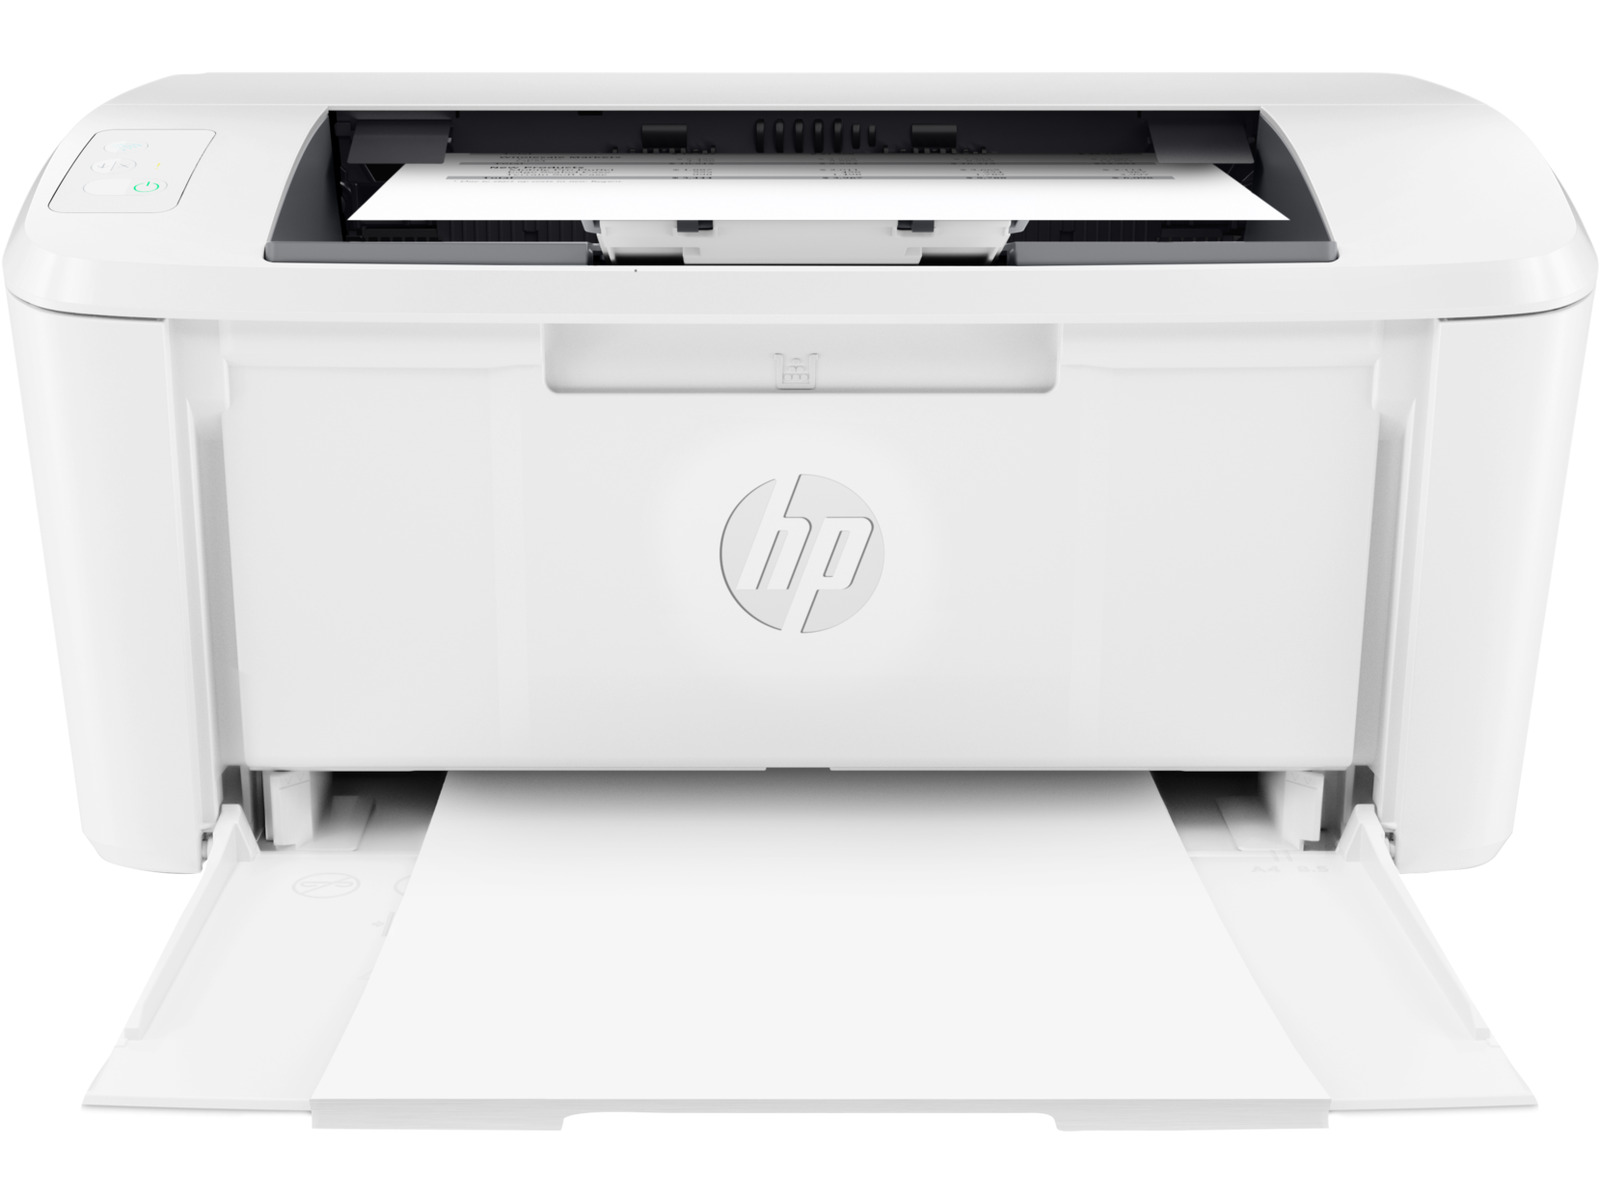 HP LaserJet M110w Laser Printer, Black And White Mobile Print Up to 8000 pages